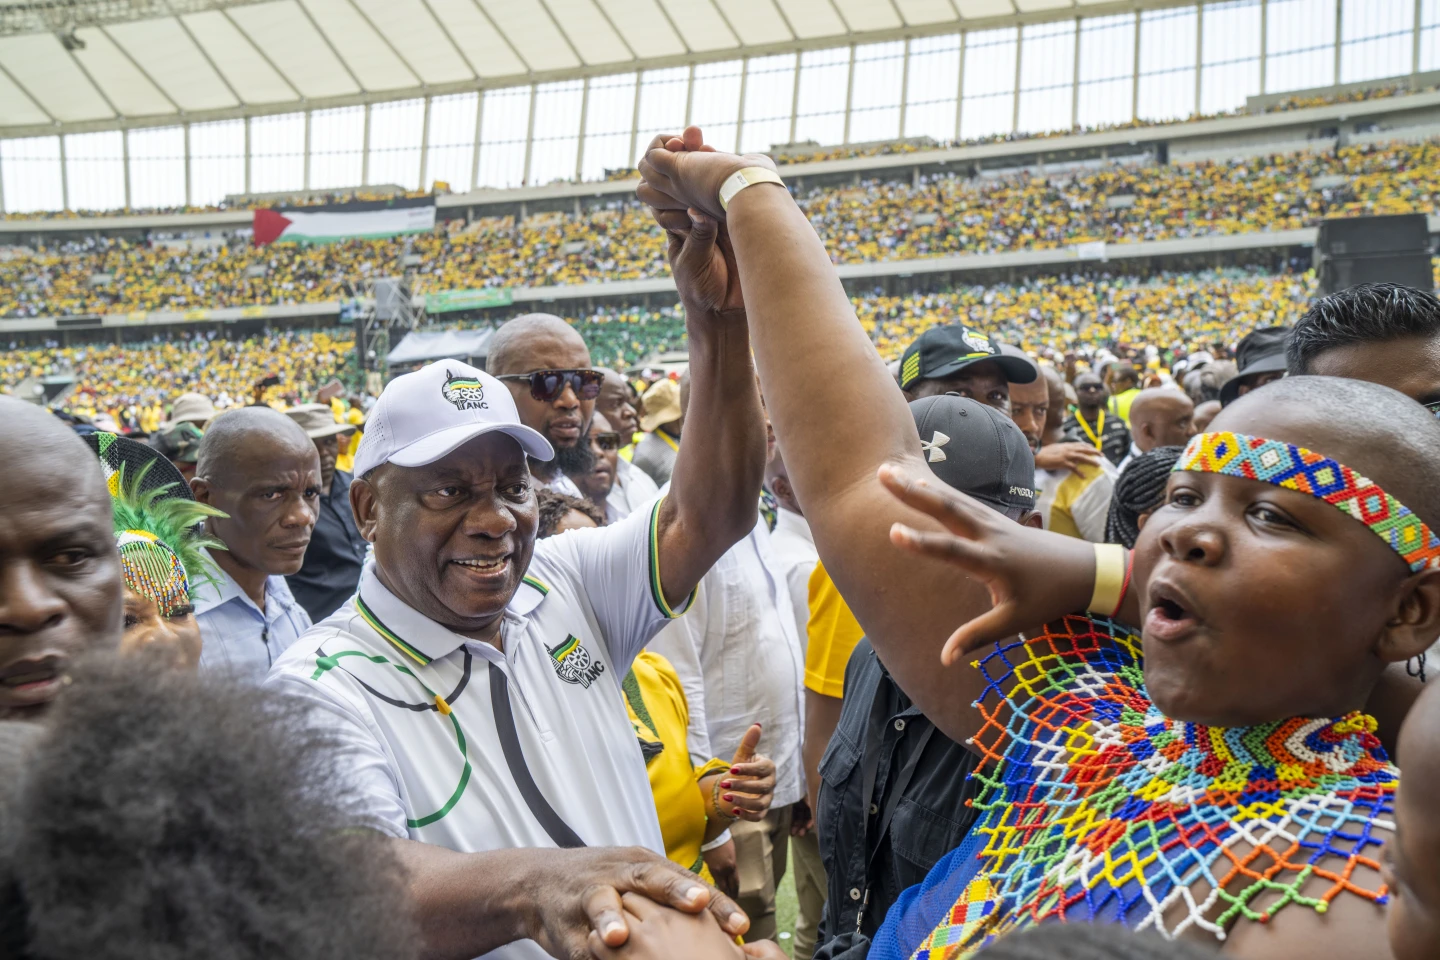 South Africa’s ruling ANC risks its freedom struggle credentials by fielding candidates facing corruption probe